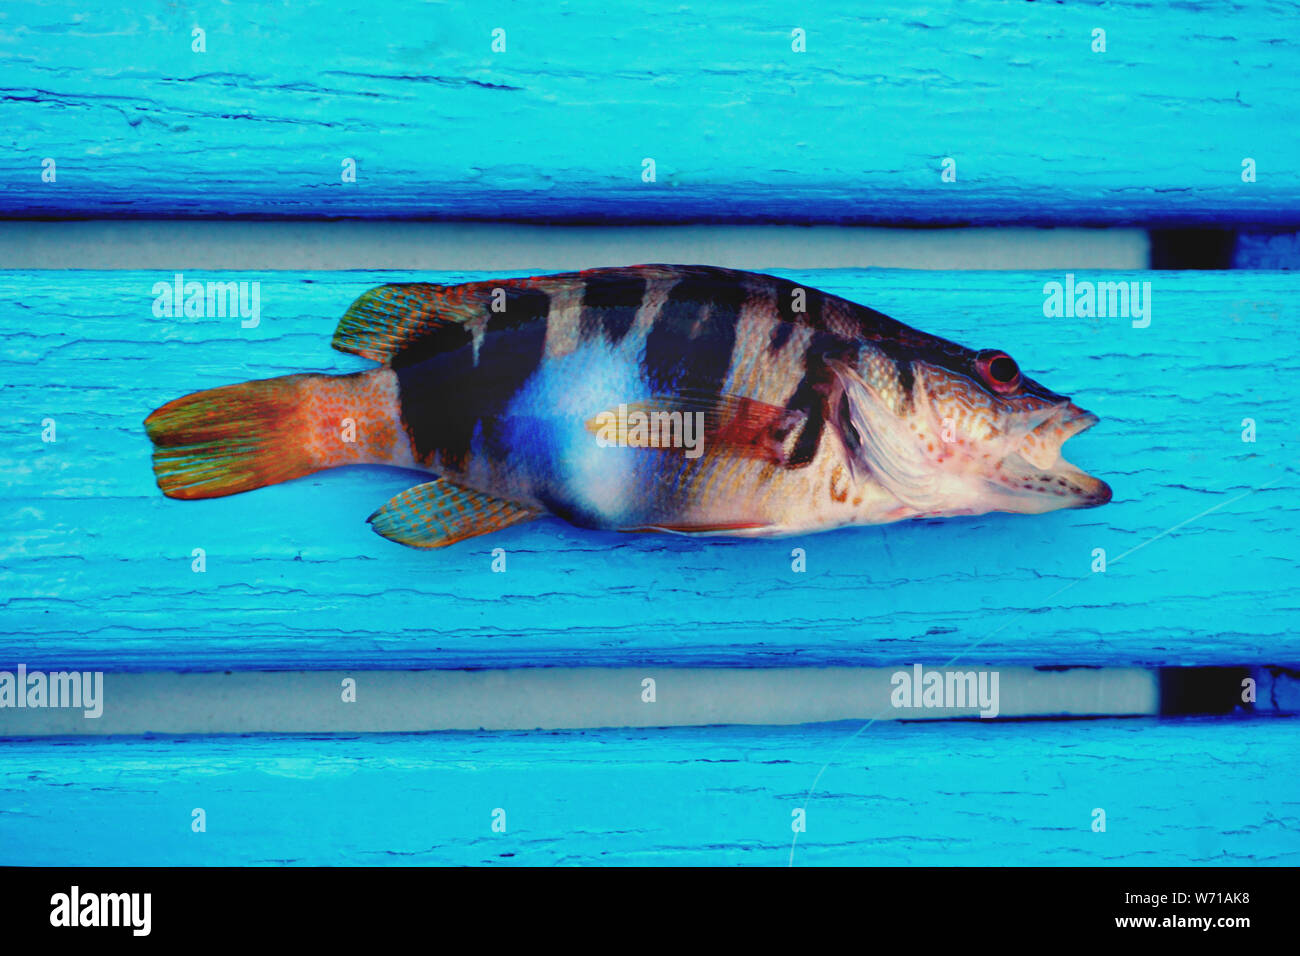 Small colorful sea fish Serrnus Scriba with fluorescent blue spot on the body, at the bottom of the boat on the light blue wooden floorboards Stock Photo